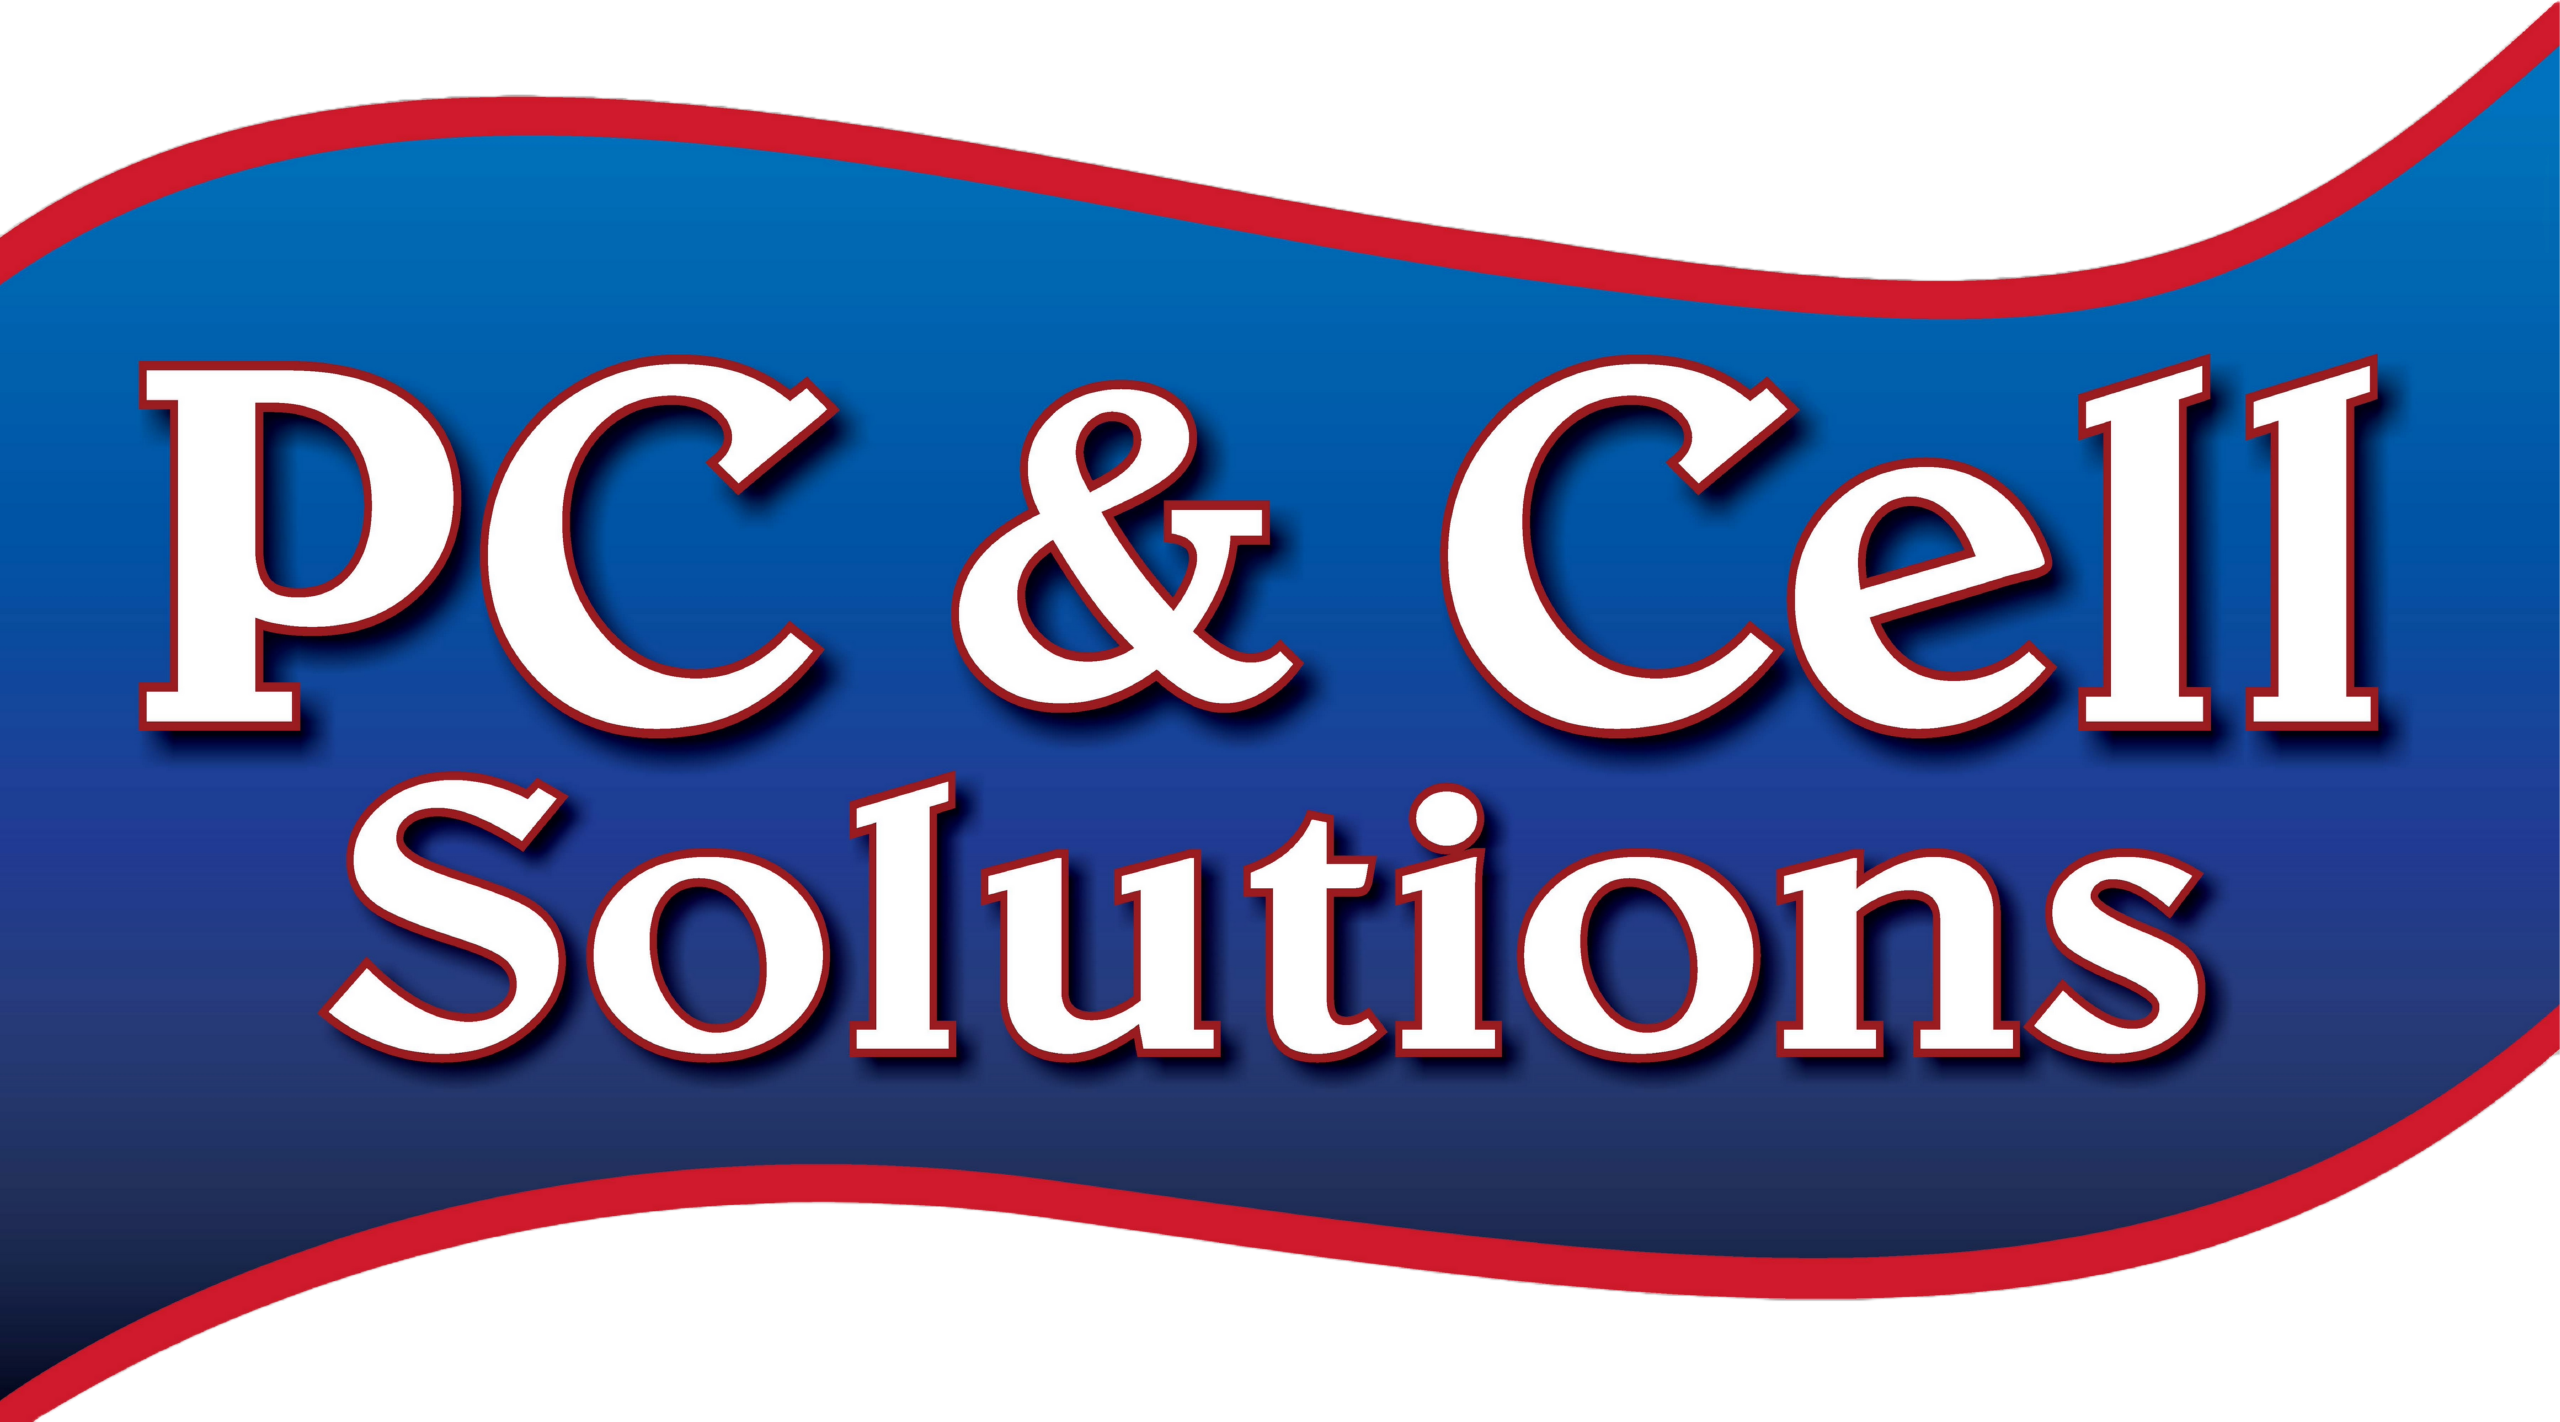 PC & Cell Solutions - Your one stop computer shop!